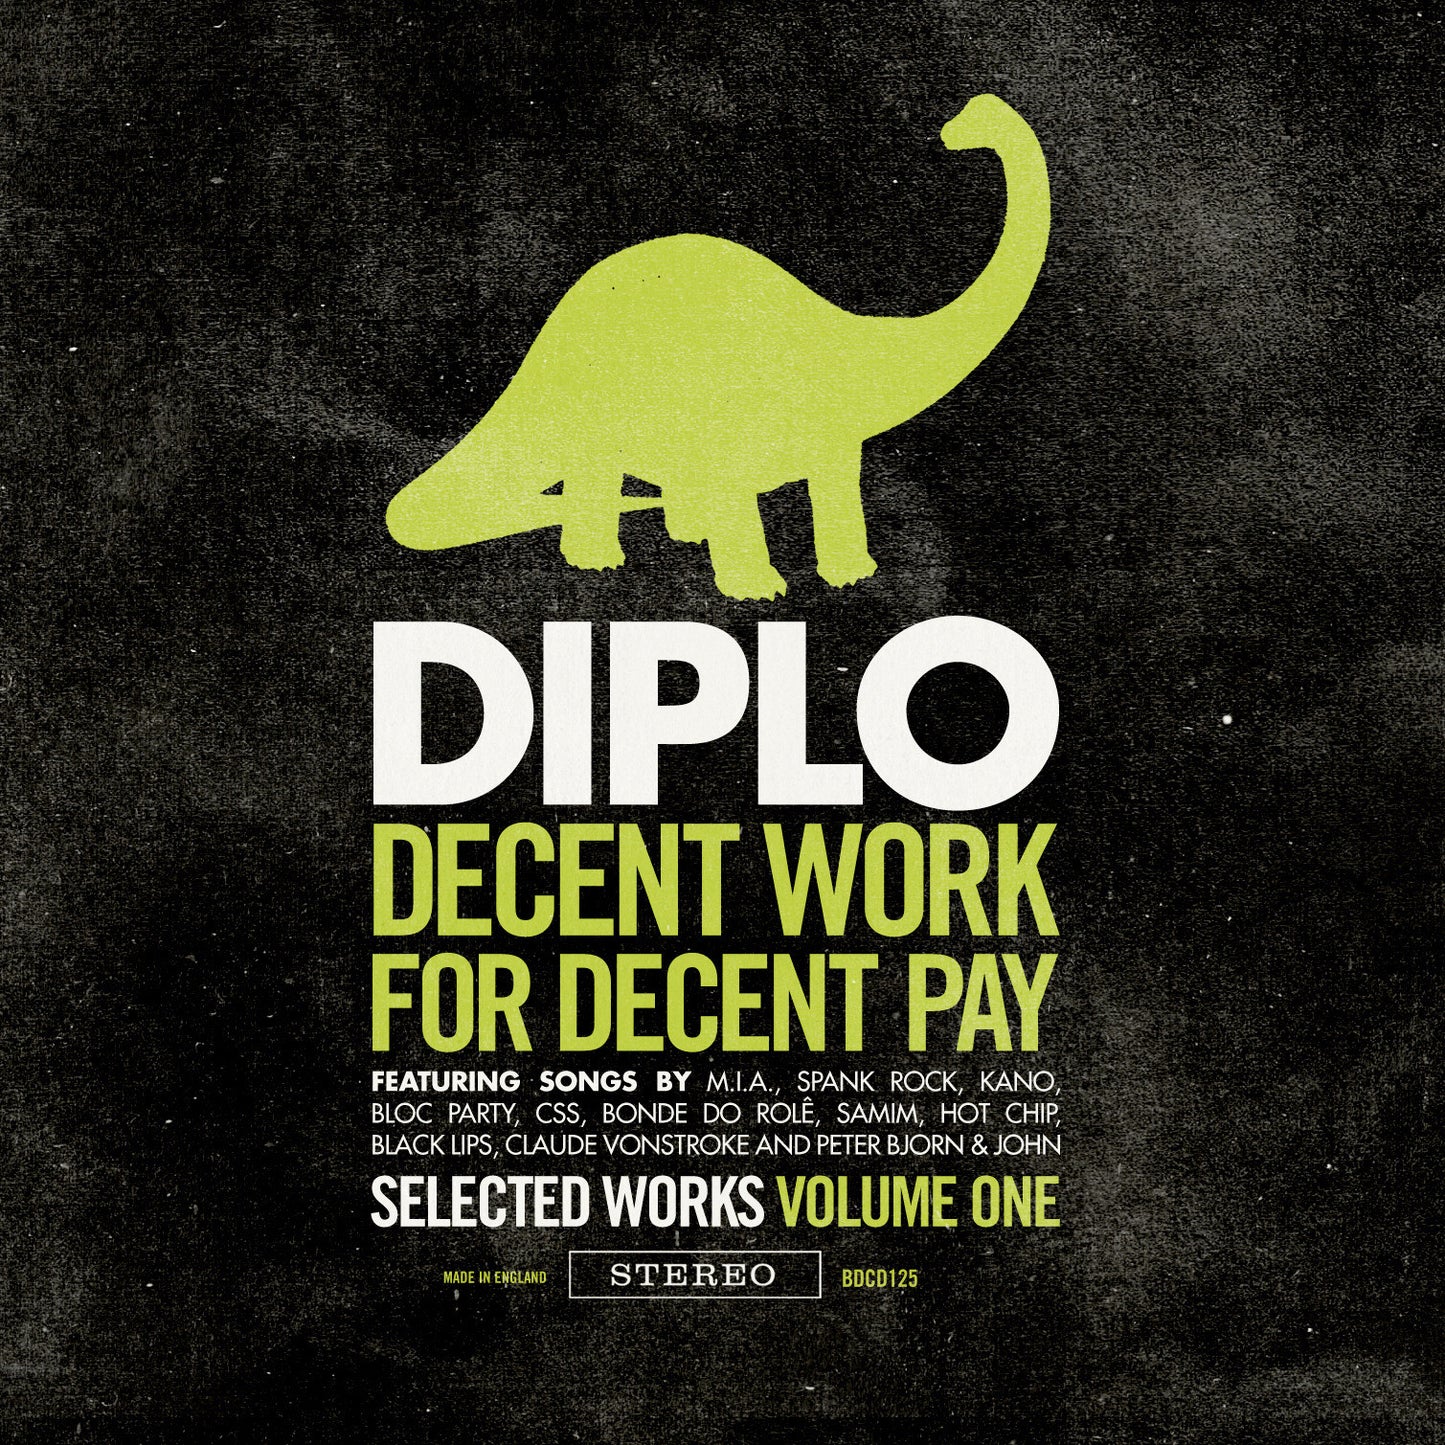 Diplo - Decent Work 4 Decent Pay, CD - The Giant Peach